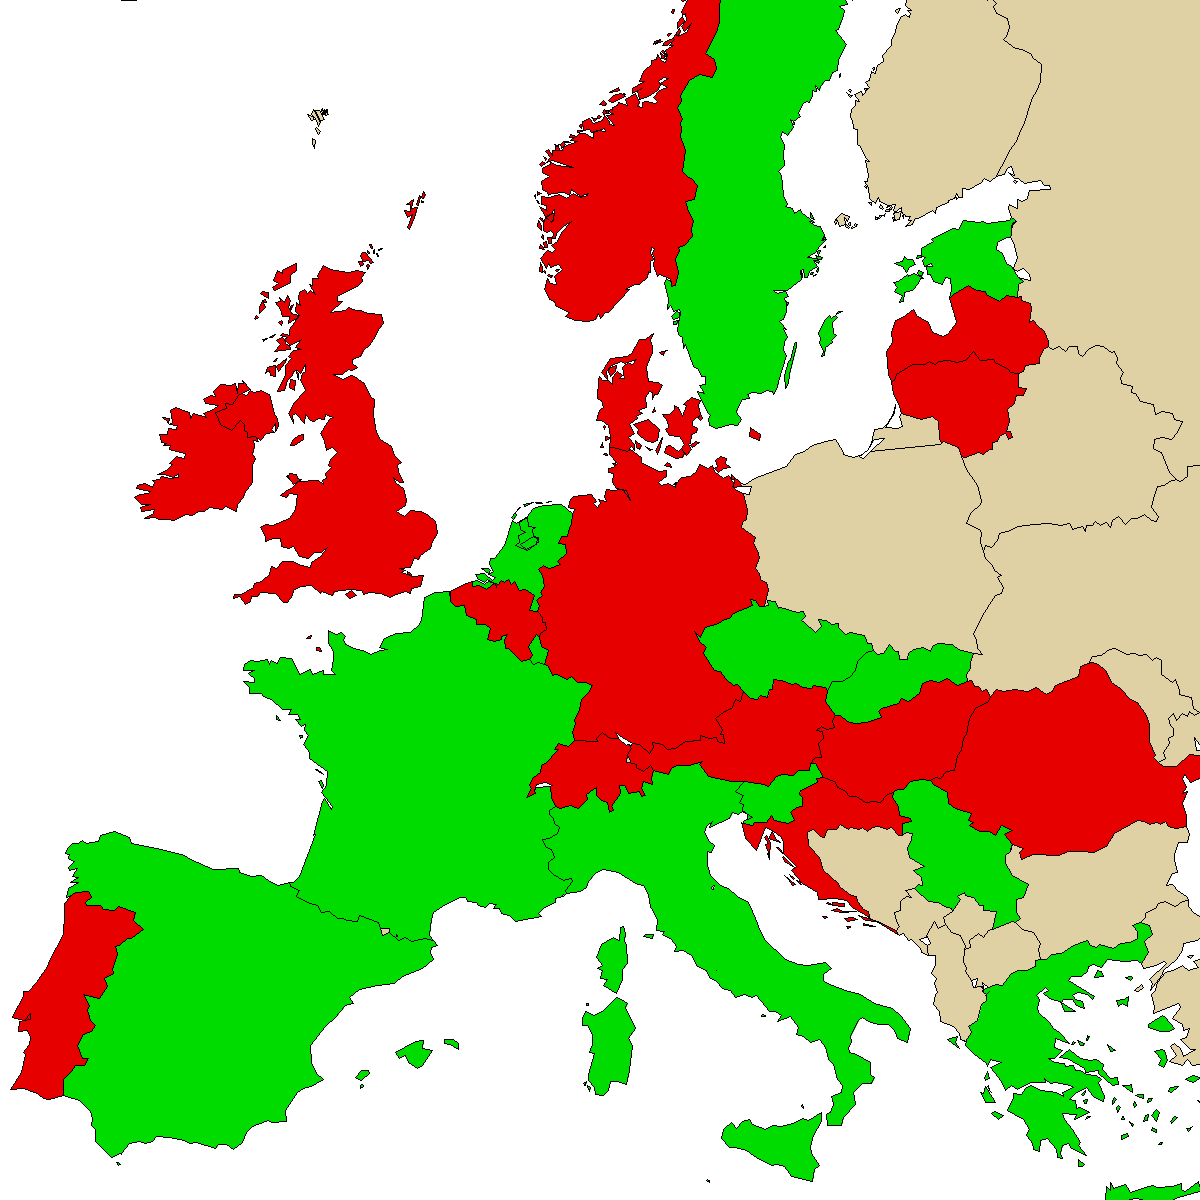 legal info map for our product 3MMA, green are countries where we found no ban, red with ban, grey is unknown